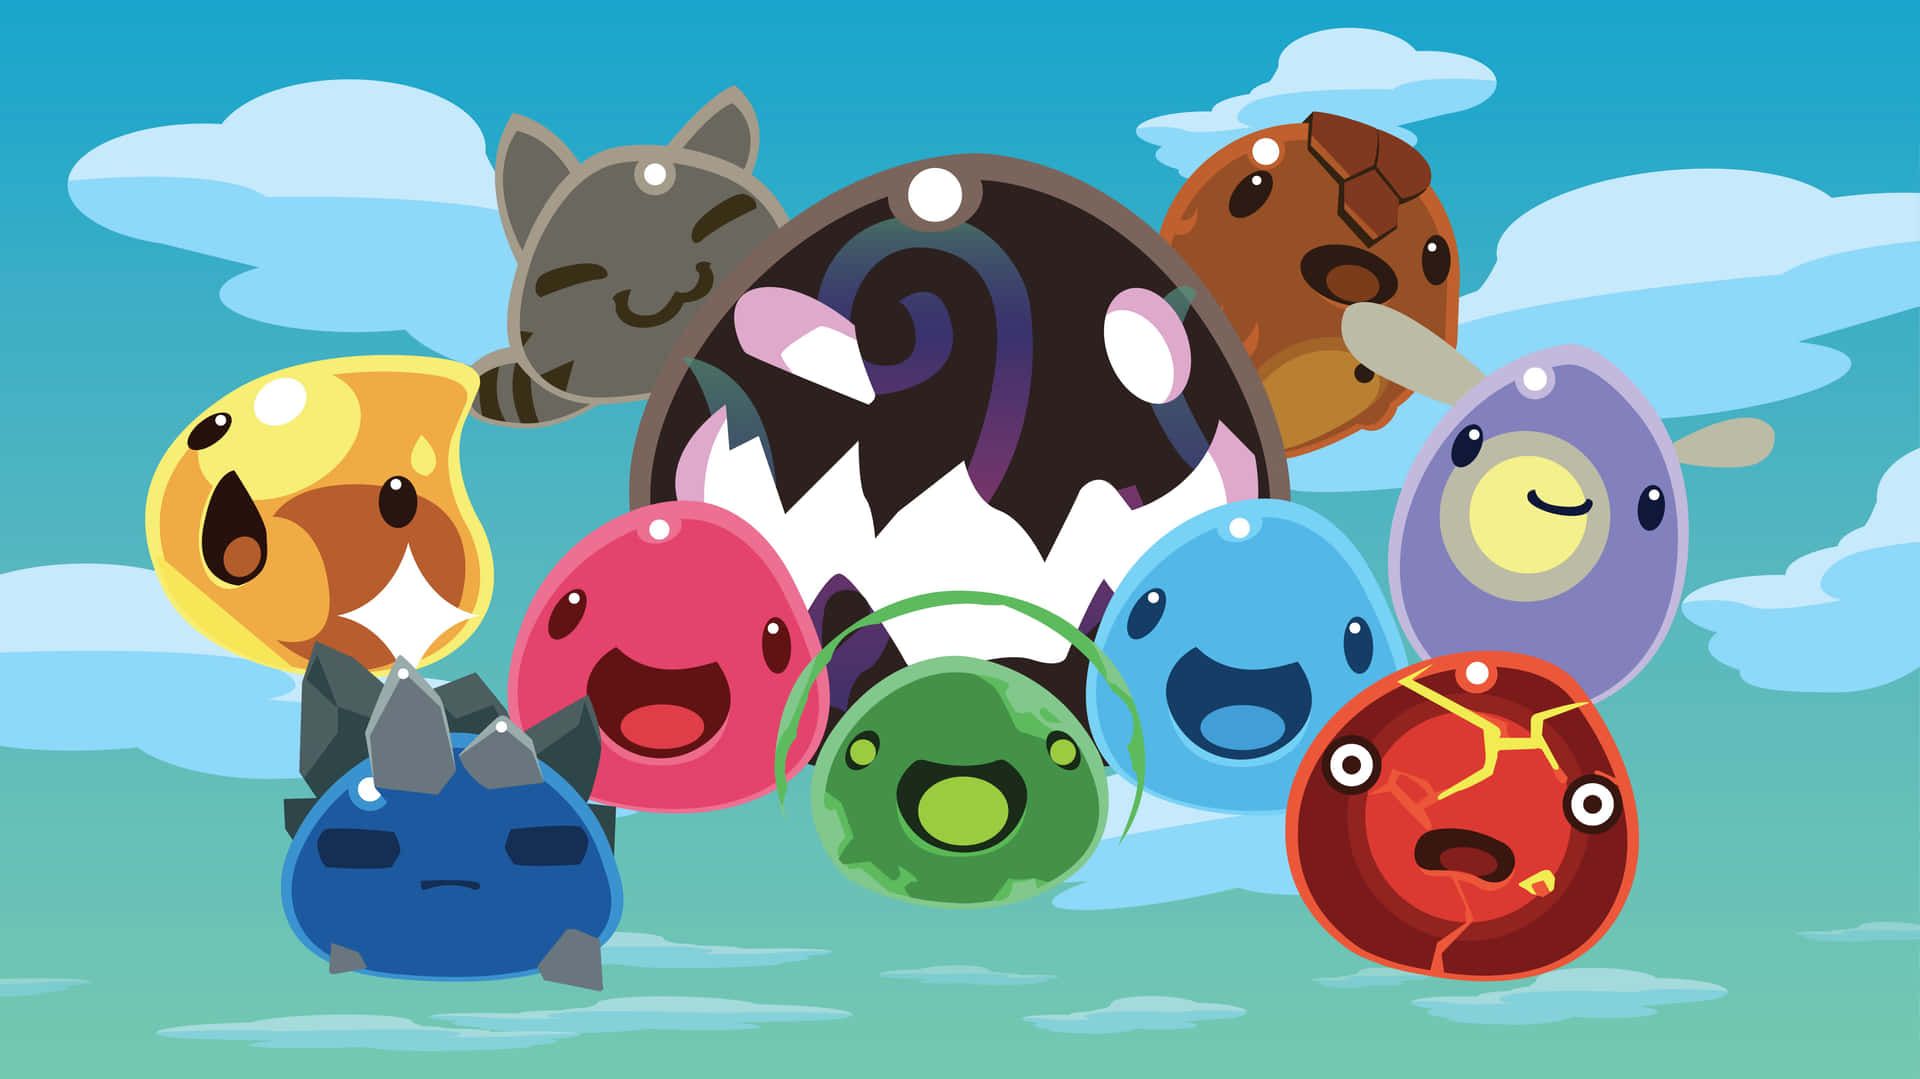 Download Enjoy the fun and adventure of Slime Rancher! Wallpaper